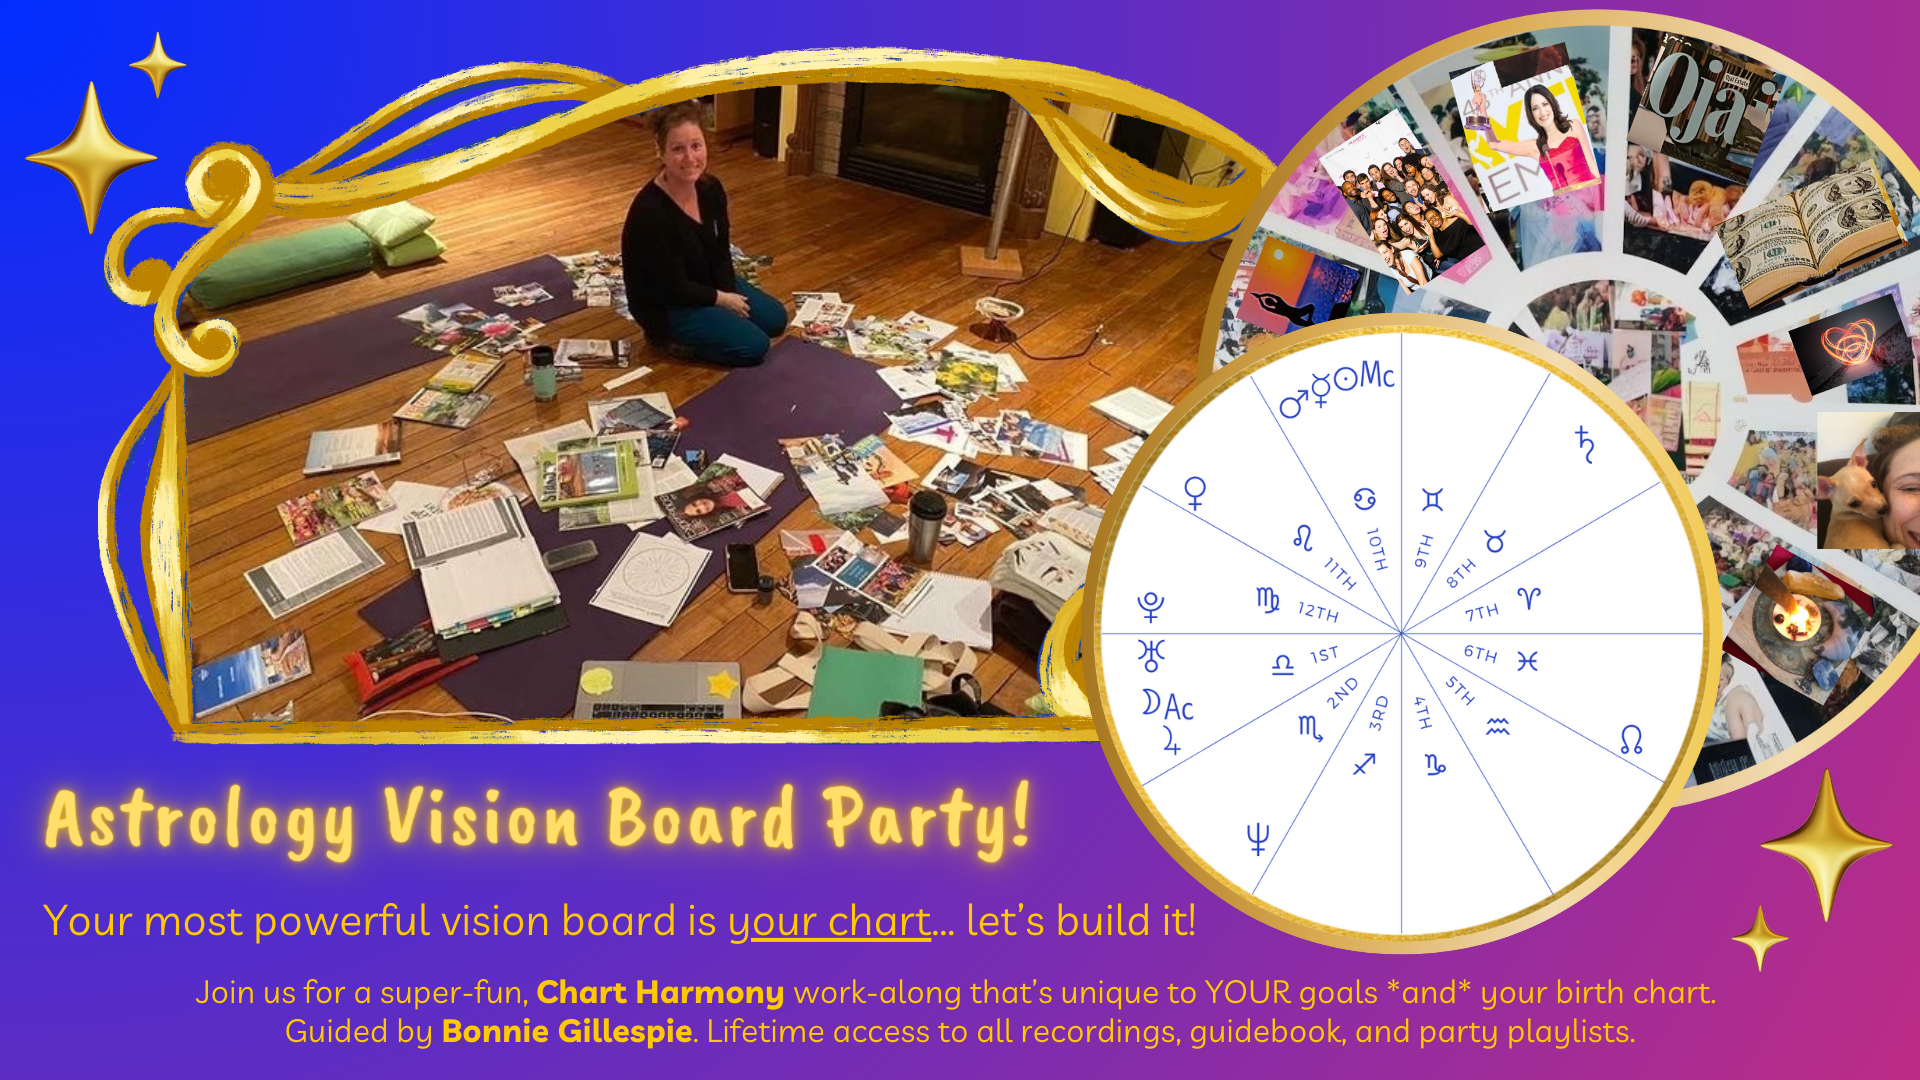 smiling client sitting among all the images she has laid out in a circle around her, ready to build her custom vision board - astrological chart - a vision board in the shape of an astrological chart - text with details about our live event